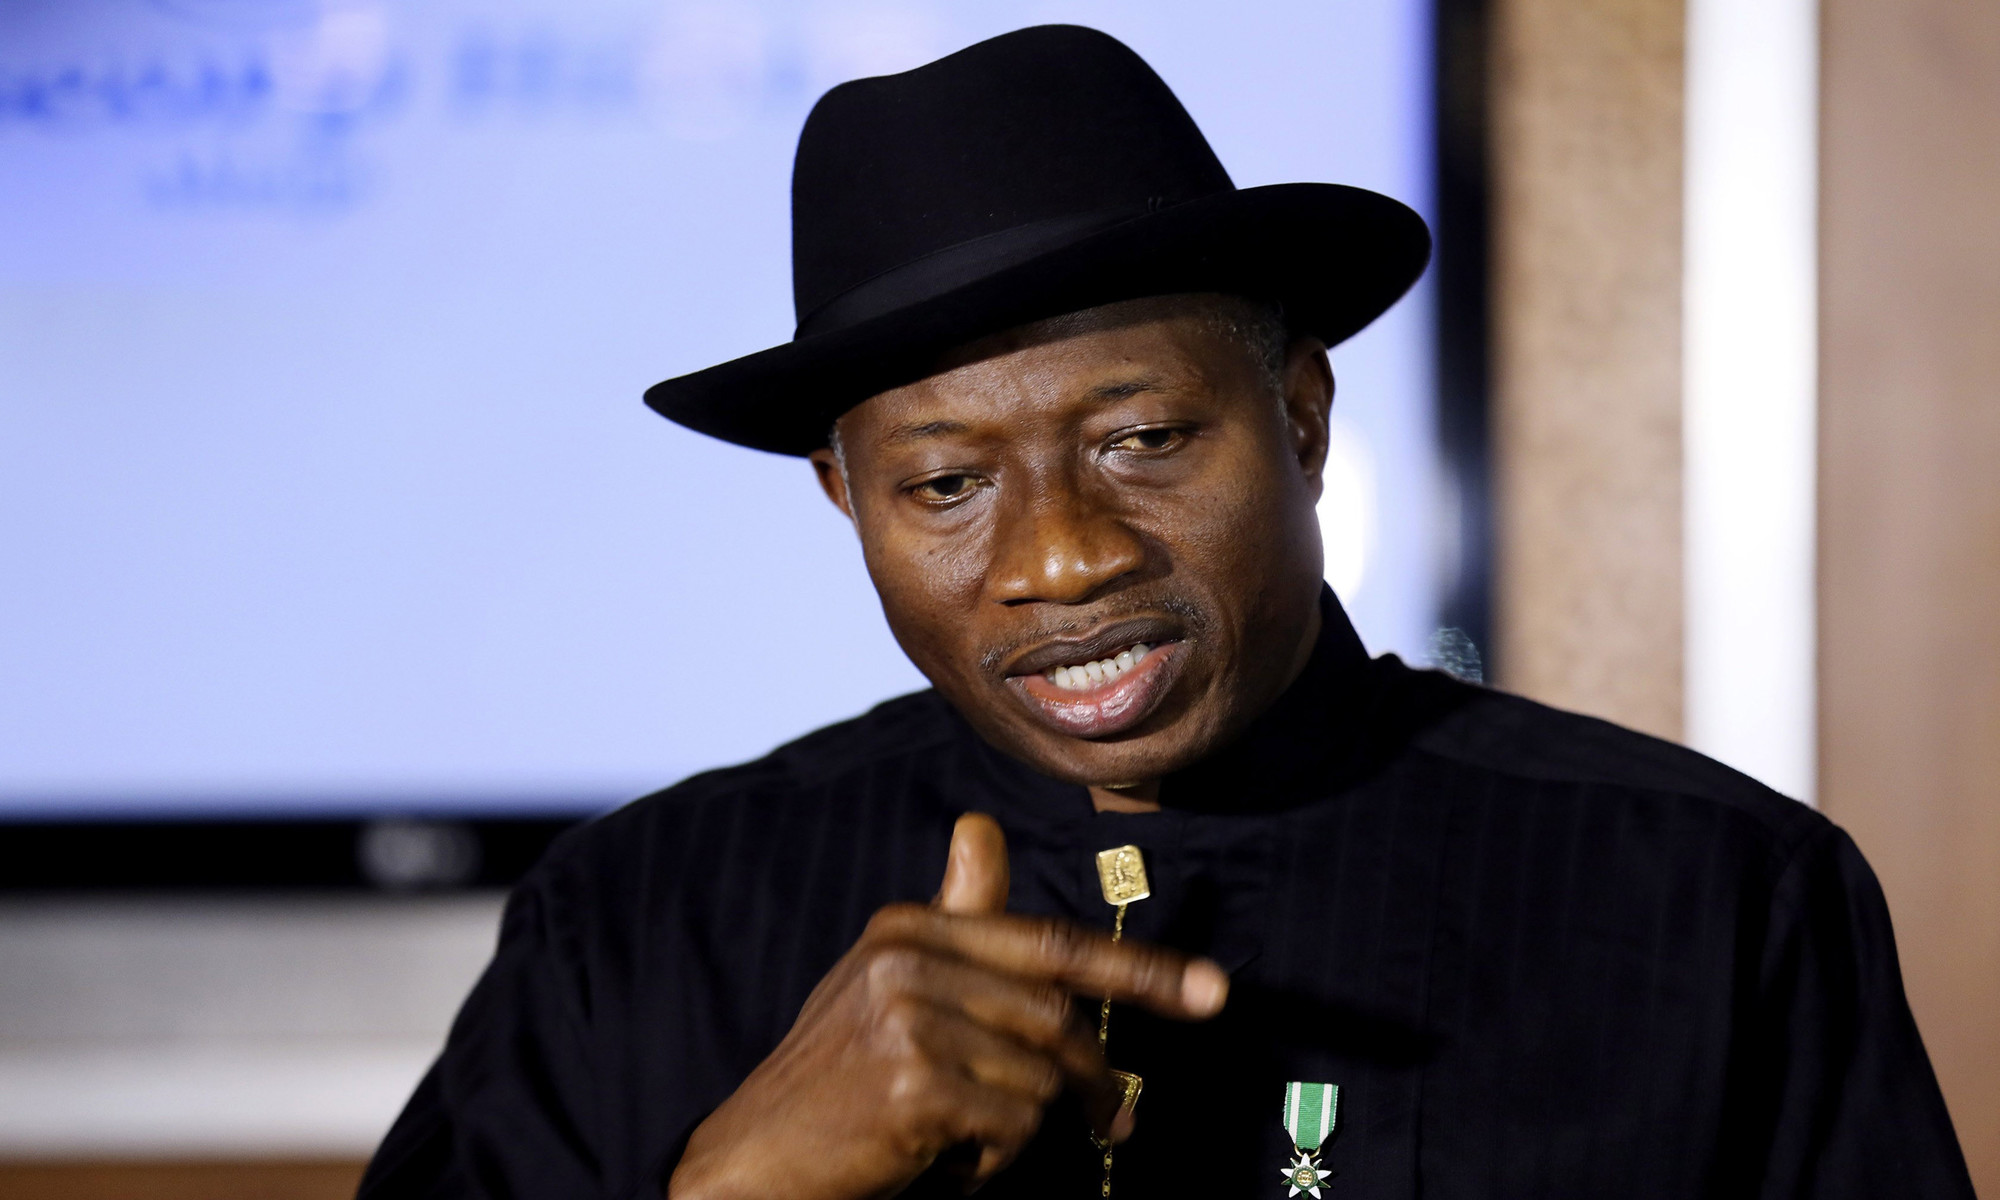 jonathan-to-biden-harris-be-magnanimous-in-victory